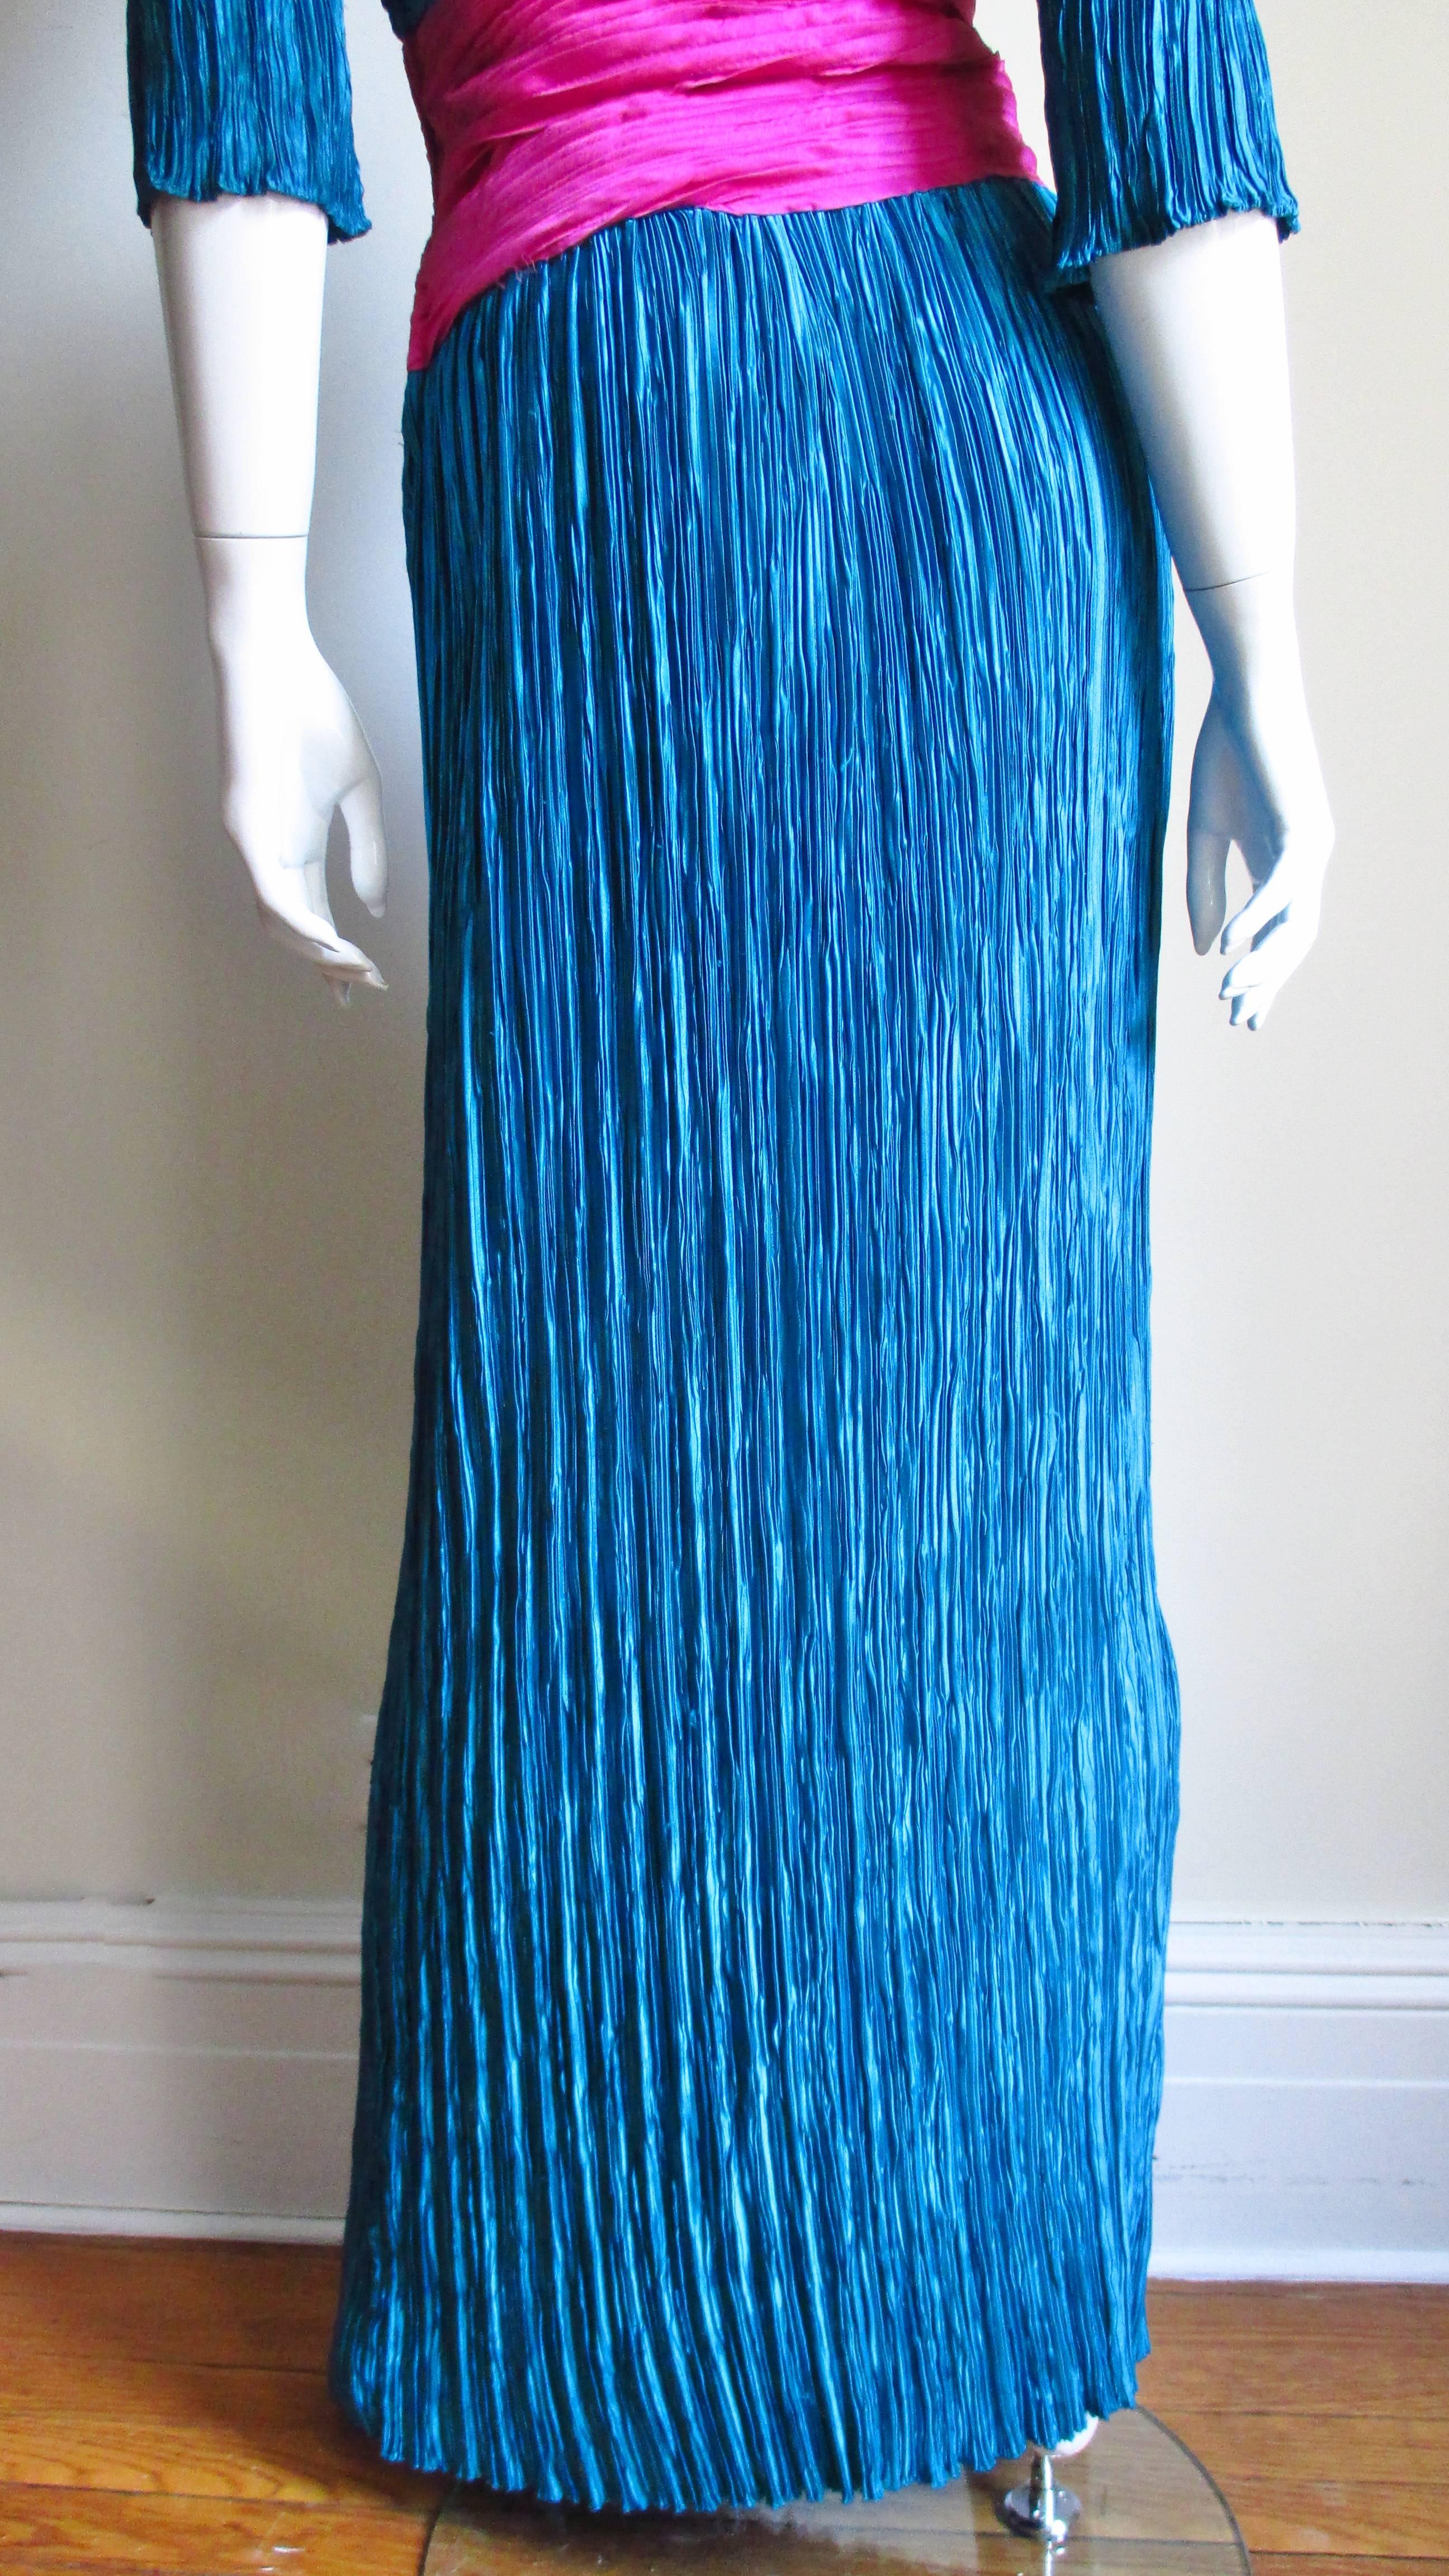  Mary McFadden Couture Color Block Gown  1